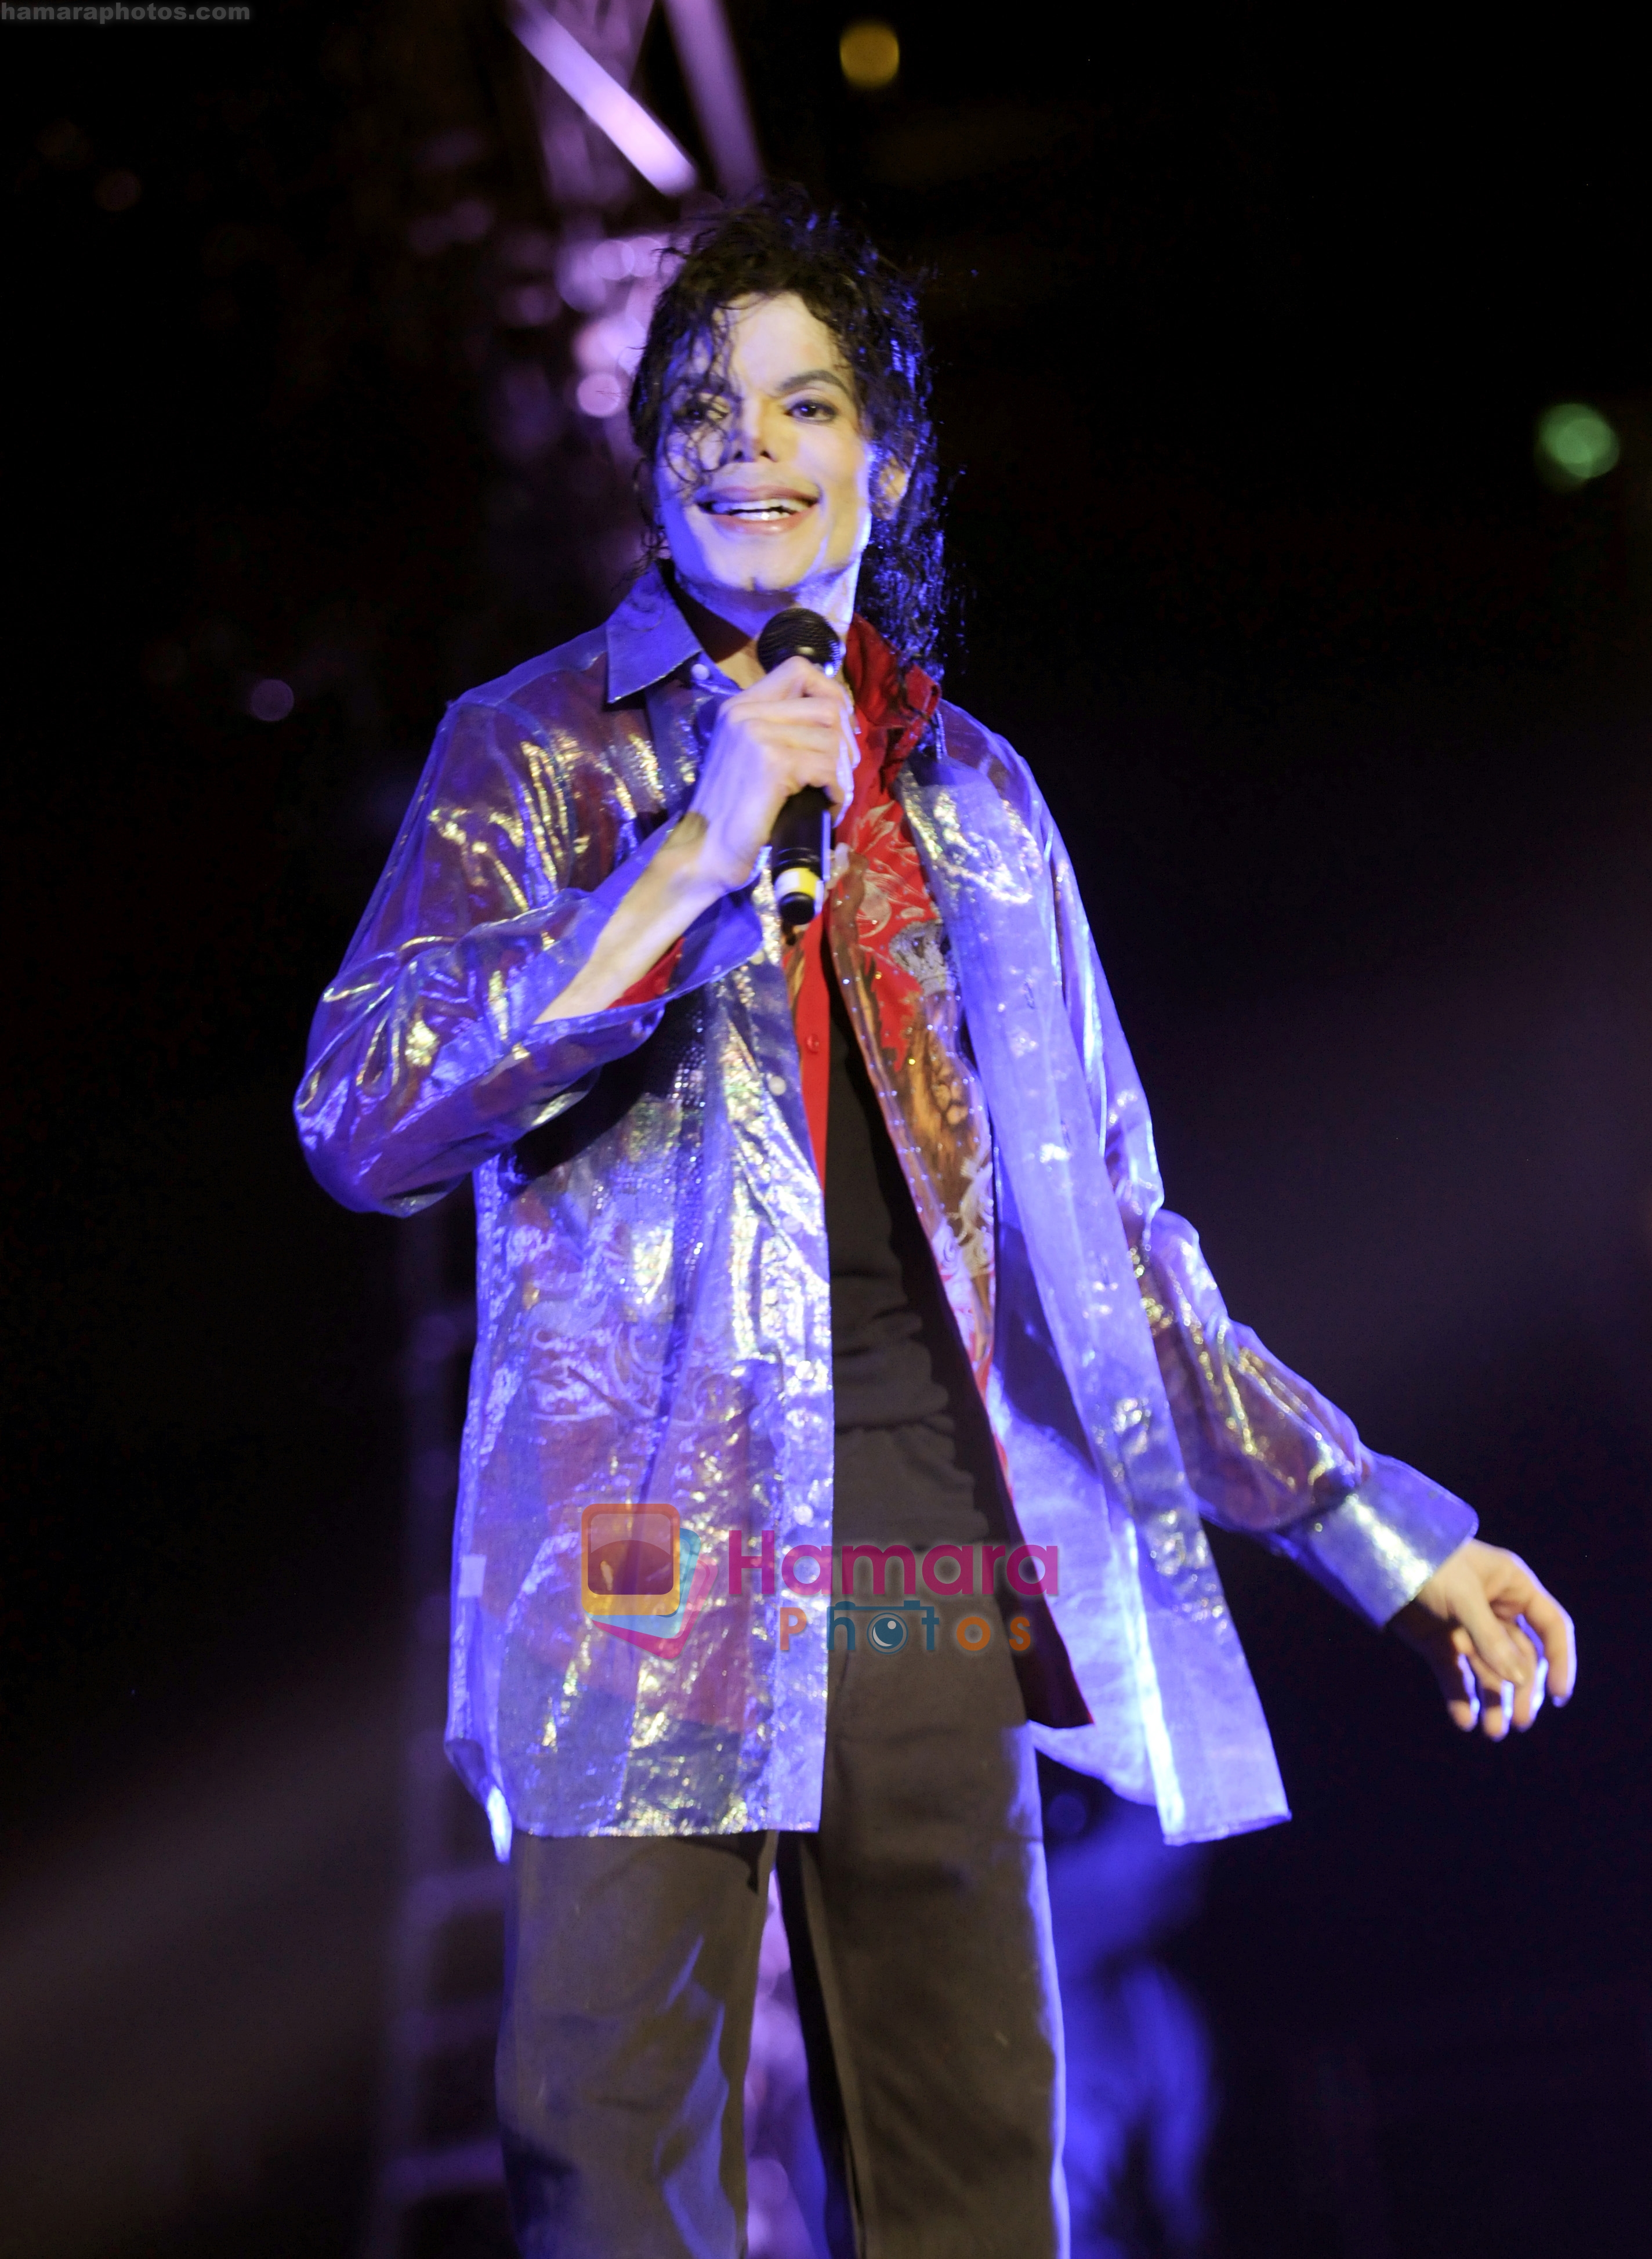 Michael Jackson's last show rehearsal at STAPLES Center on June 23rd in Los Angeles, CA 